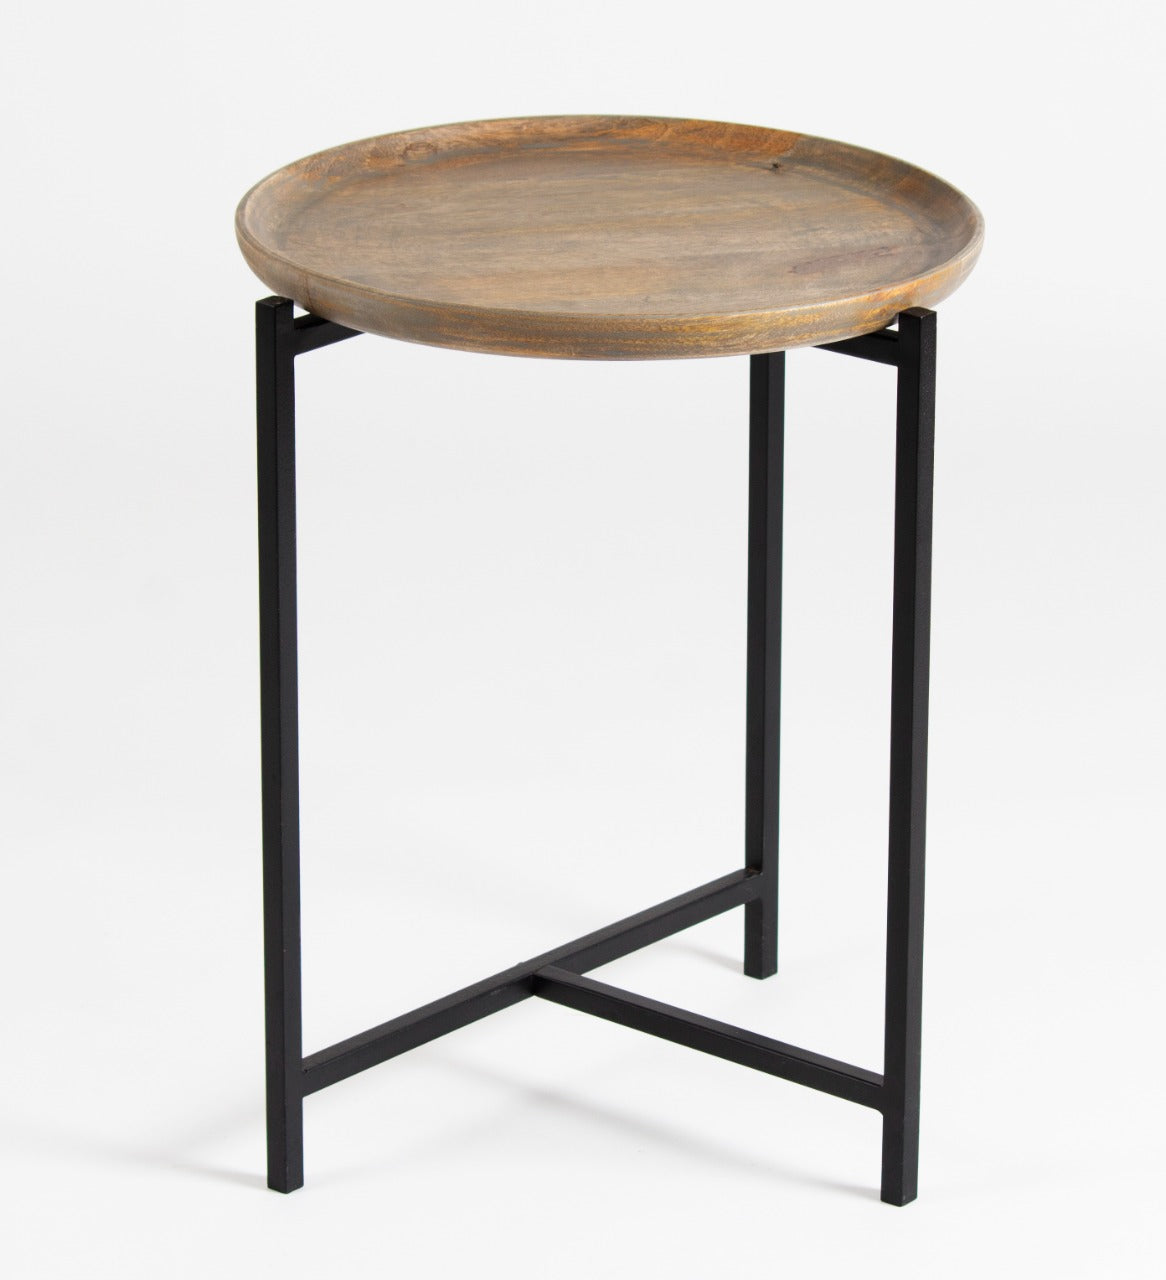 Inset Tray Top 3 Legs Accent Table